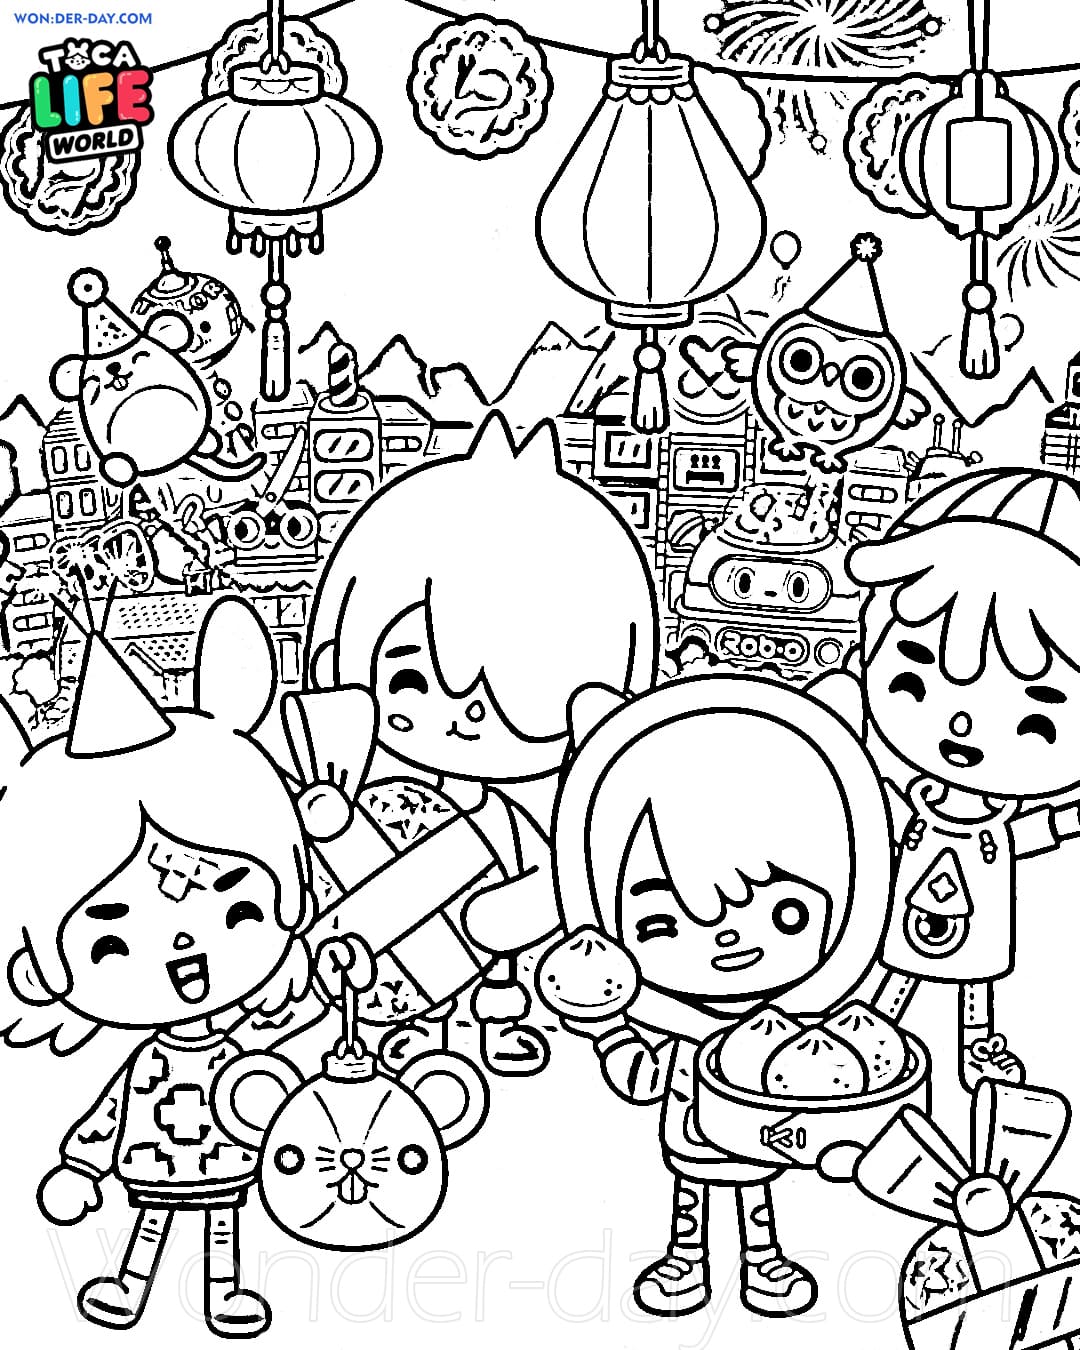 Toca Boca Life coloring pages Printable coloring pages